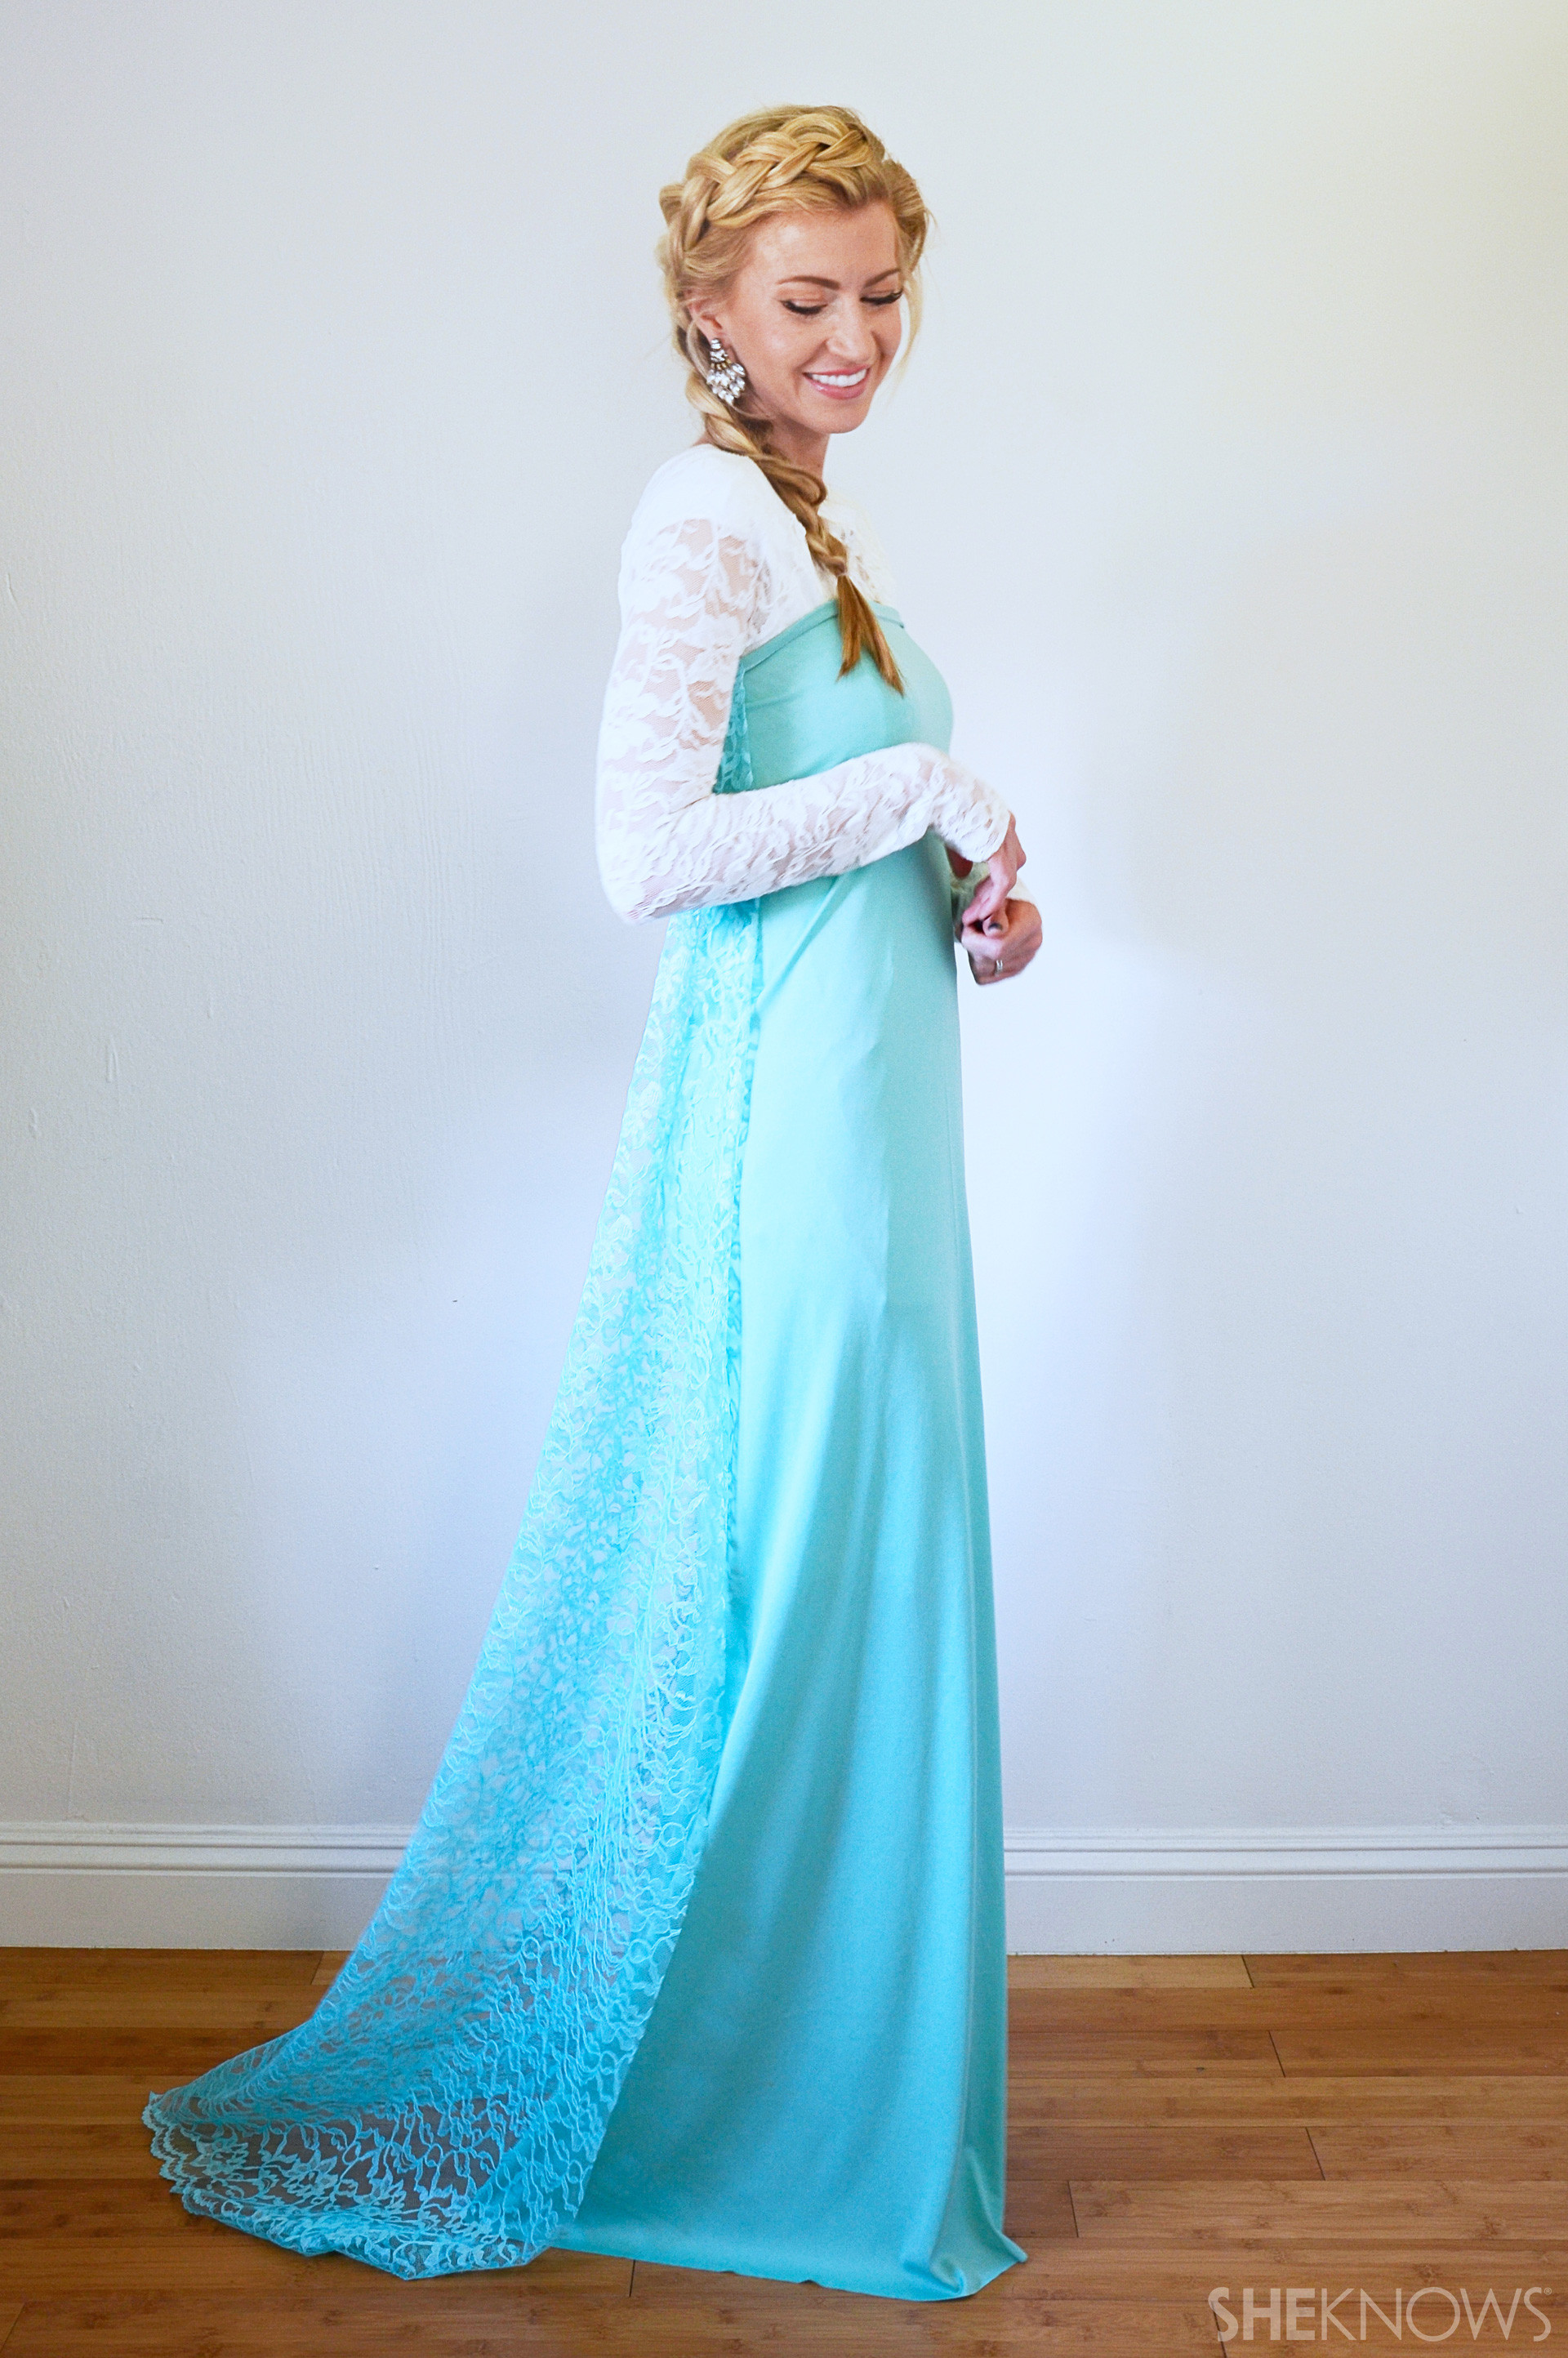 DIY Costumes For Adults
 3 Easy DIY Disney Princess Costumes — Because You re